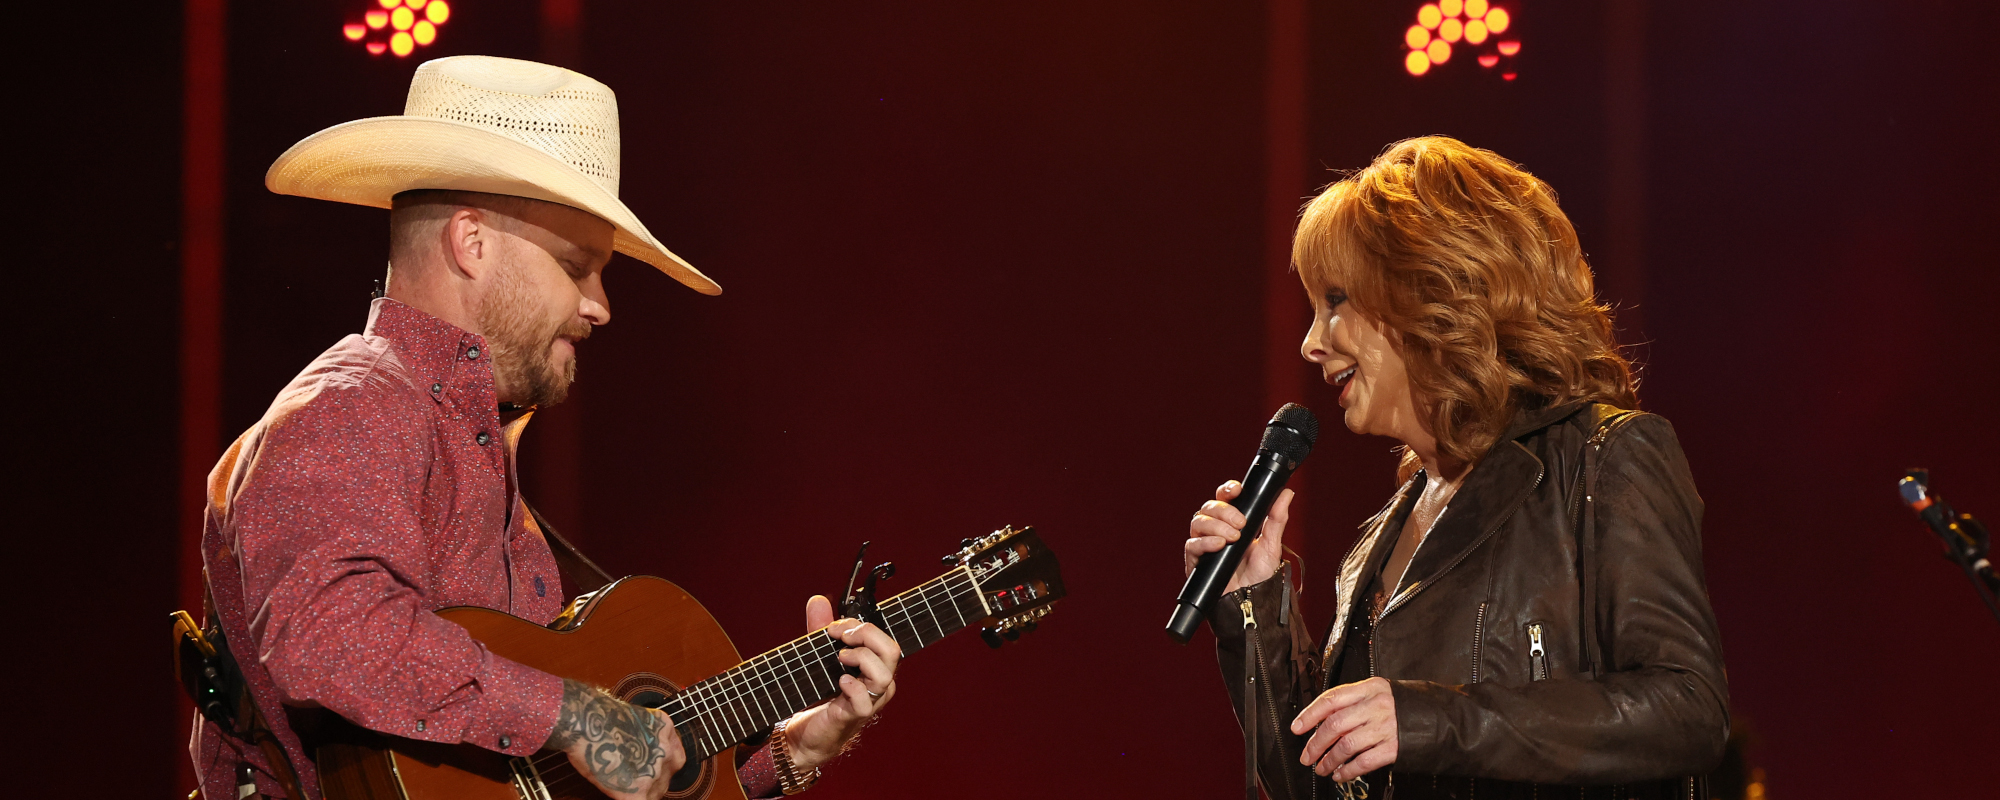 Reba McEntire Joins Cody Johnson for Surprise CMA Fest Performance of “Whoever’s in New England” (Watch)